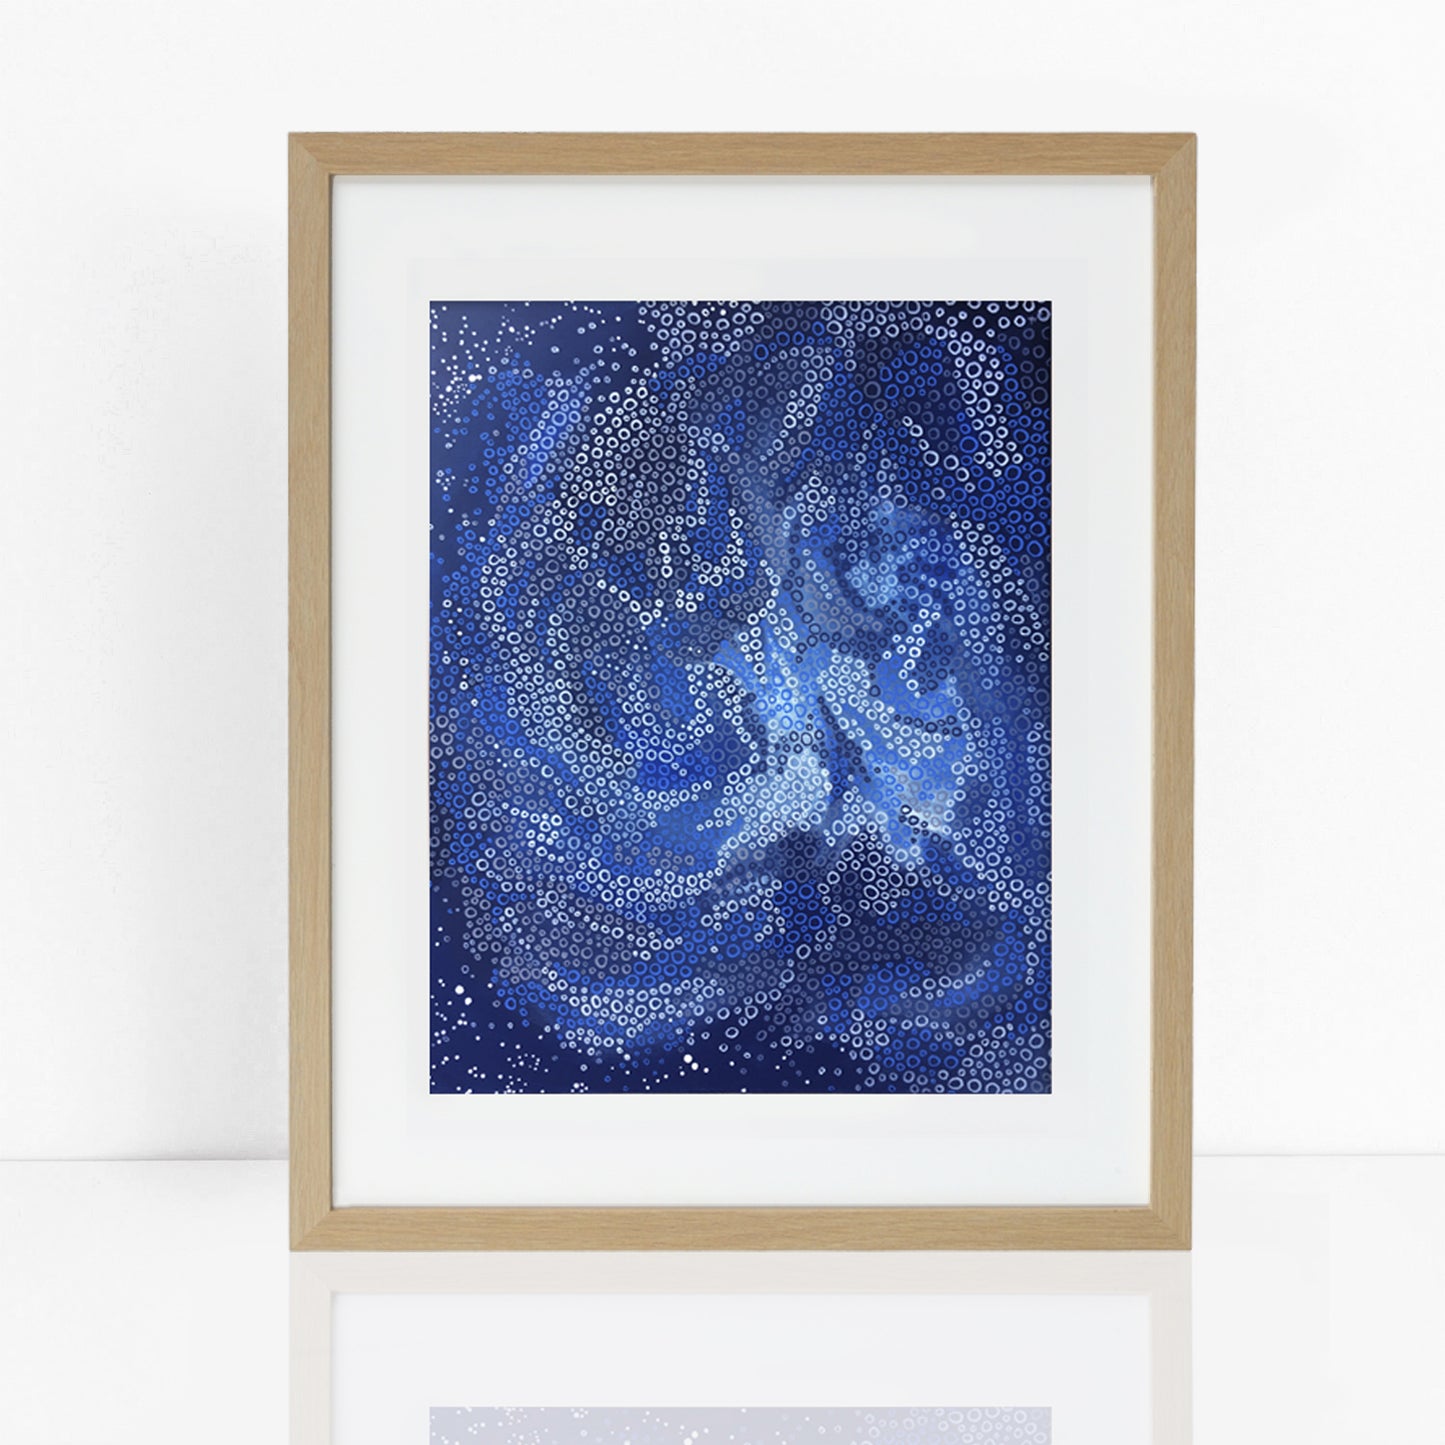 print in frame Swirling, gestural brush strokes in a mix of deep greys and blue with white circles